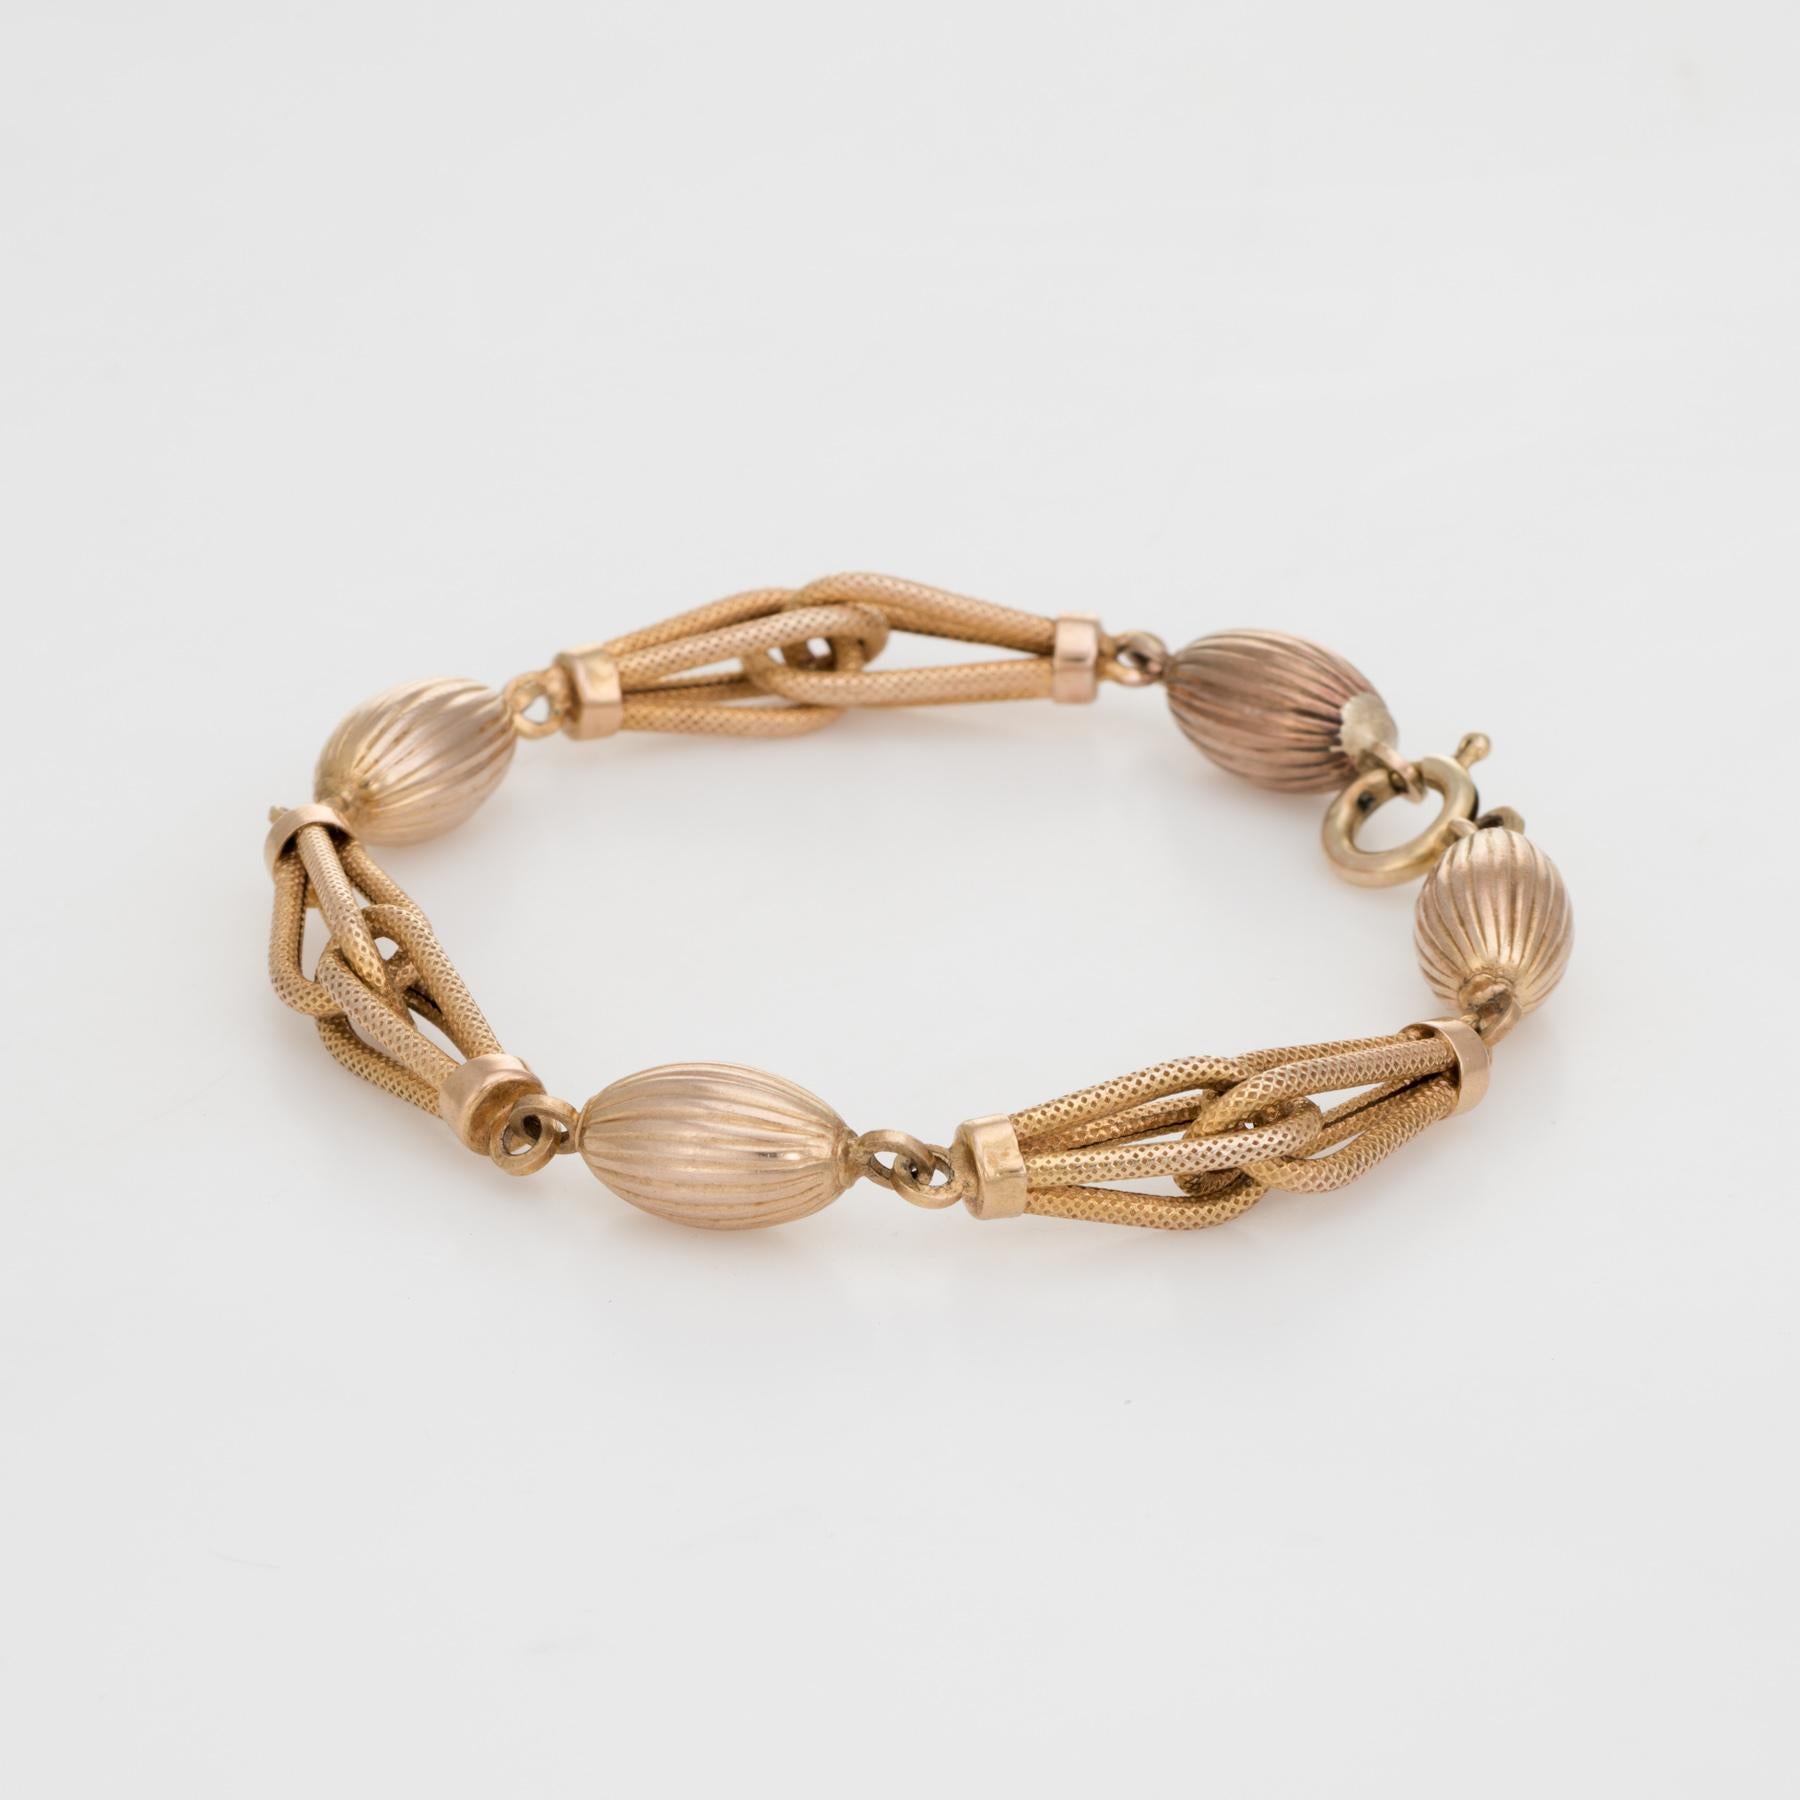 Finely detailed vintage gold link bracelet (circa 1950s to 1960s), crafted in 9k yellow gold. 

An alternating pattern of fluted tubular links with textured diamond patterned conjoined links offers a striking look. Weighing 13.1 grams of 9 karat